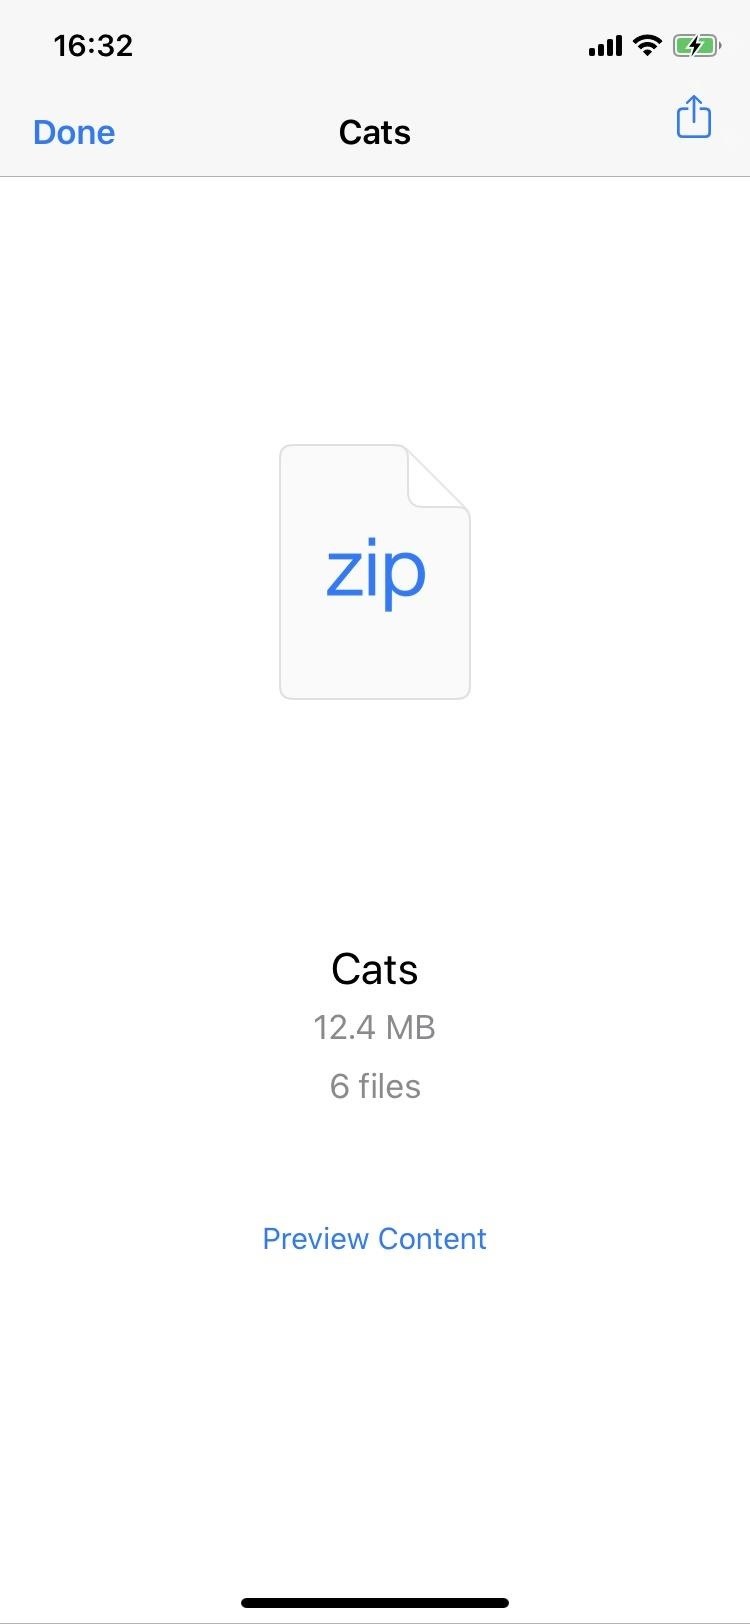 How to Share iCloud Drive Folders to Collaborators or as ZIP Files to Anyone from Your iPhone